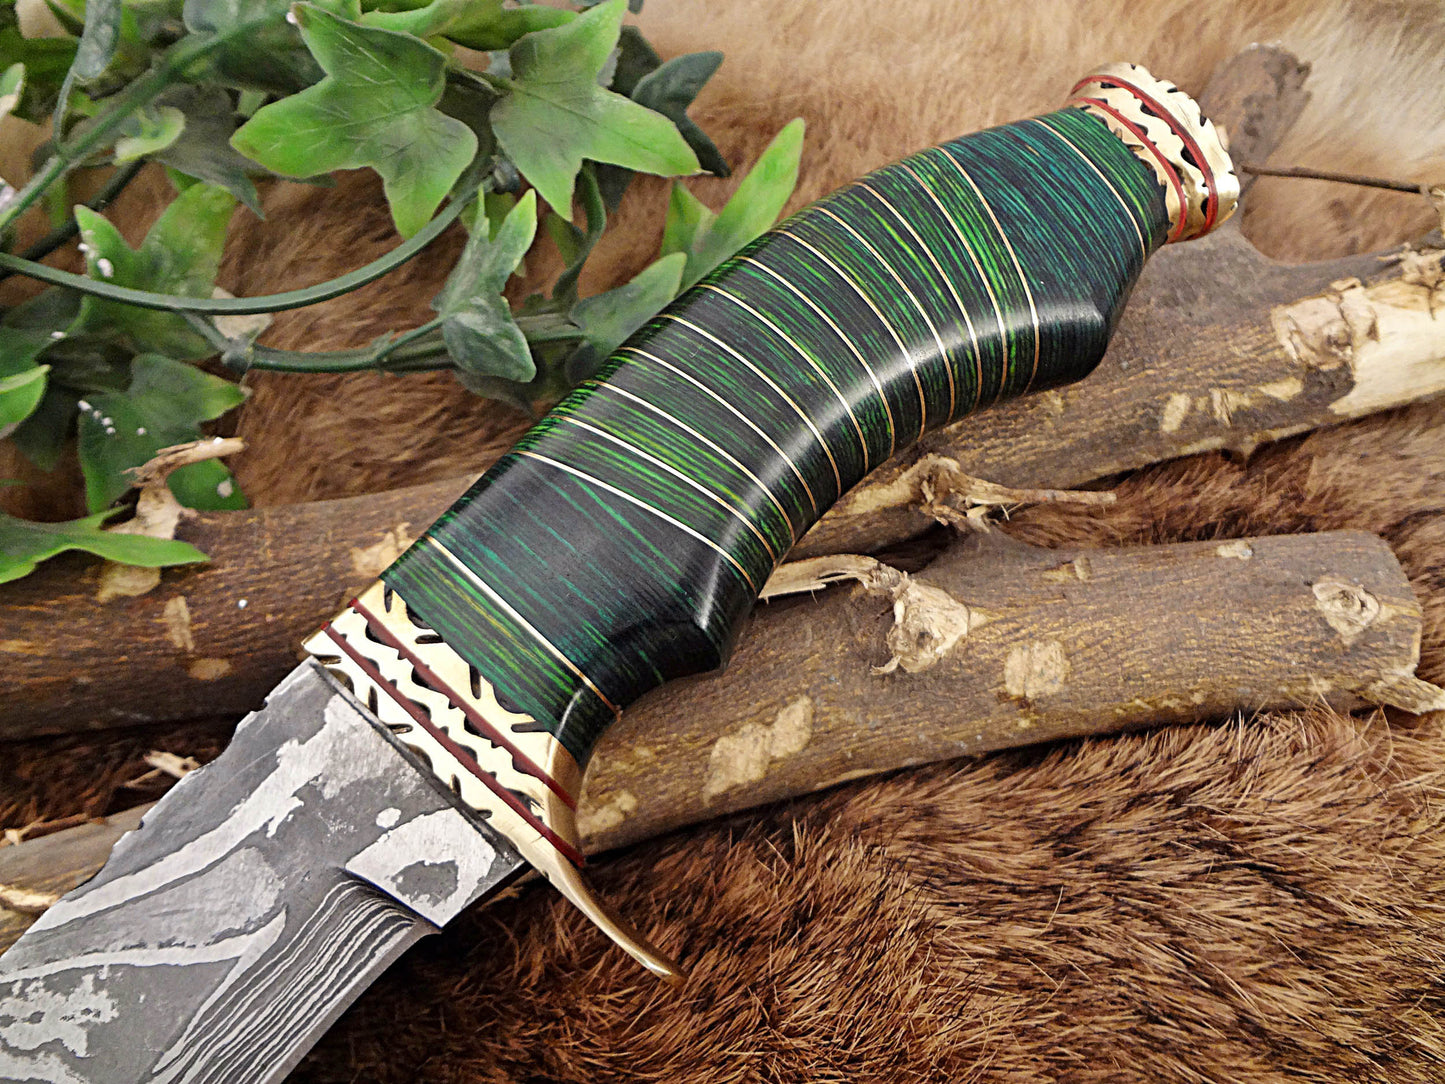 Damascus Steel Kukri Knife 14.5 Inches custom made Hand Forged With 10" blade, 2 Tone Green wood with engraved brass scale, Leather Sheath